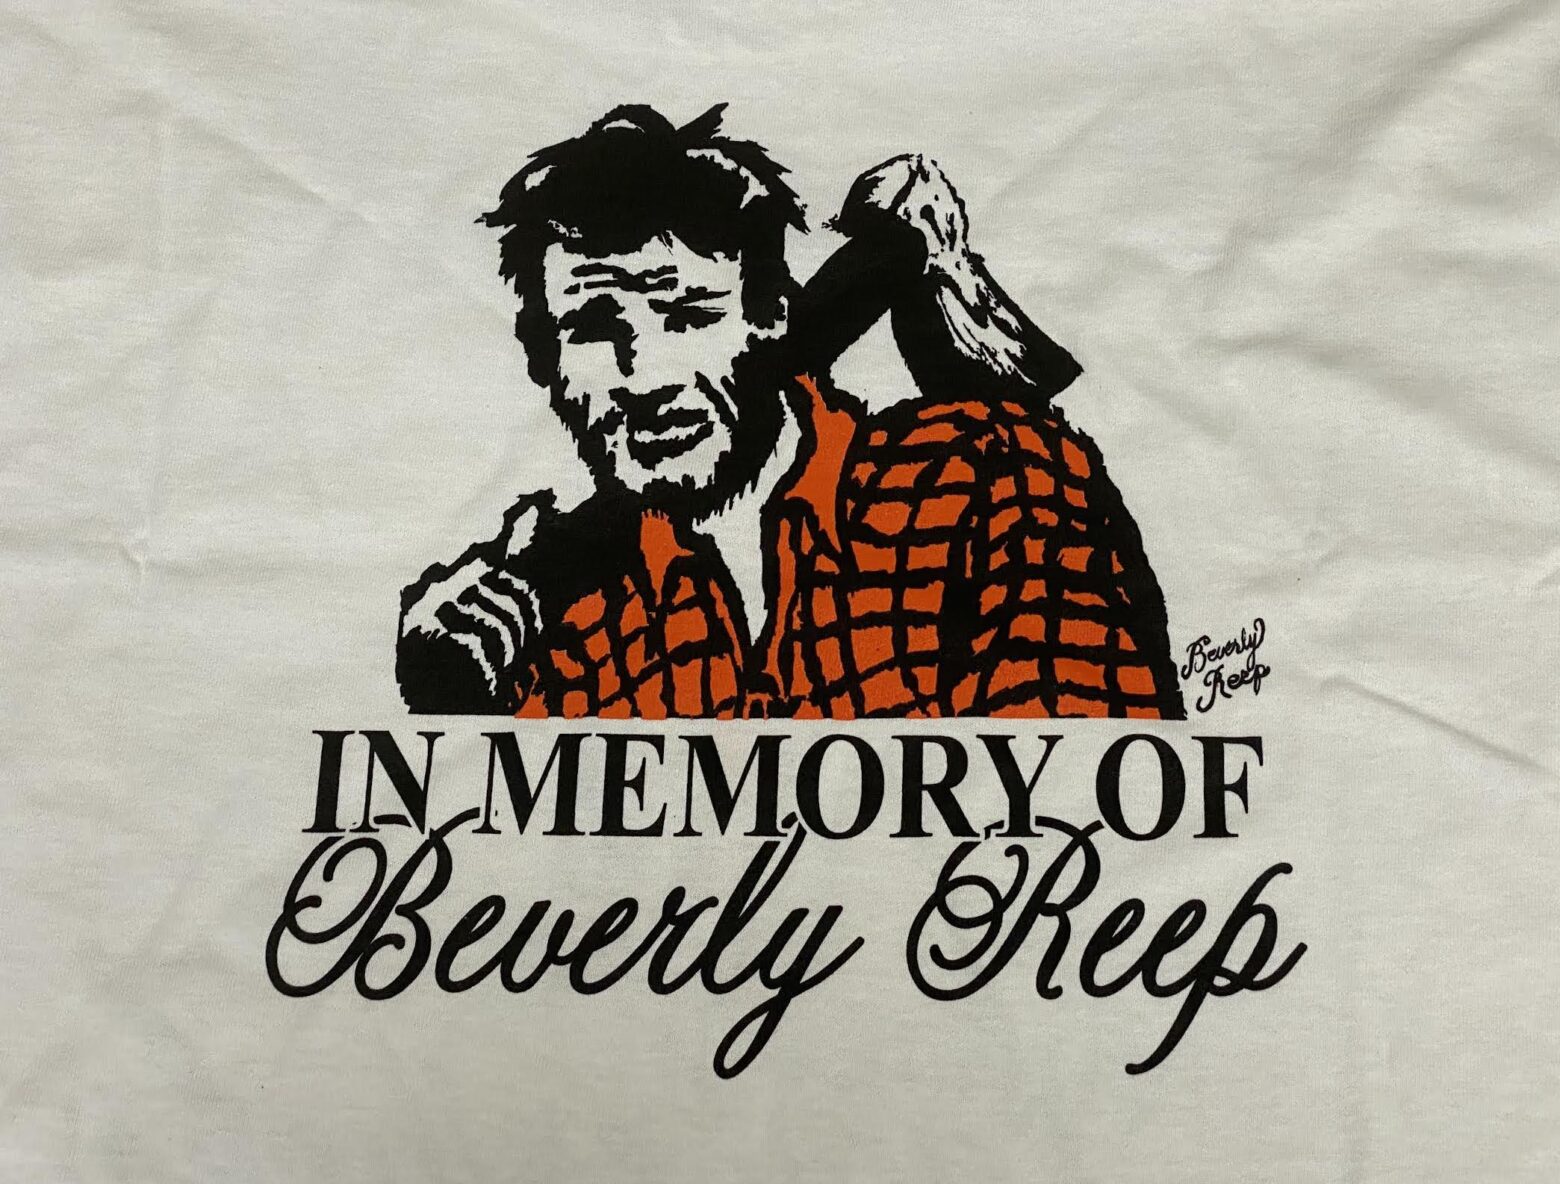 Lumberjack t-shirts featuring art of the late Beverly Reep now available for purchase as part of fundraising effort